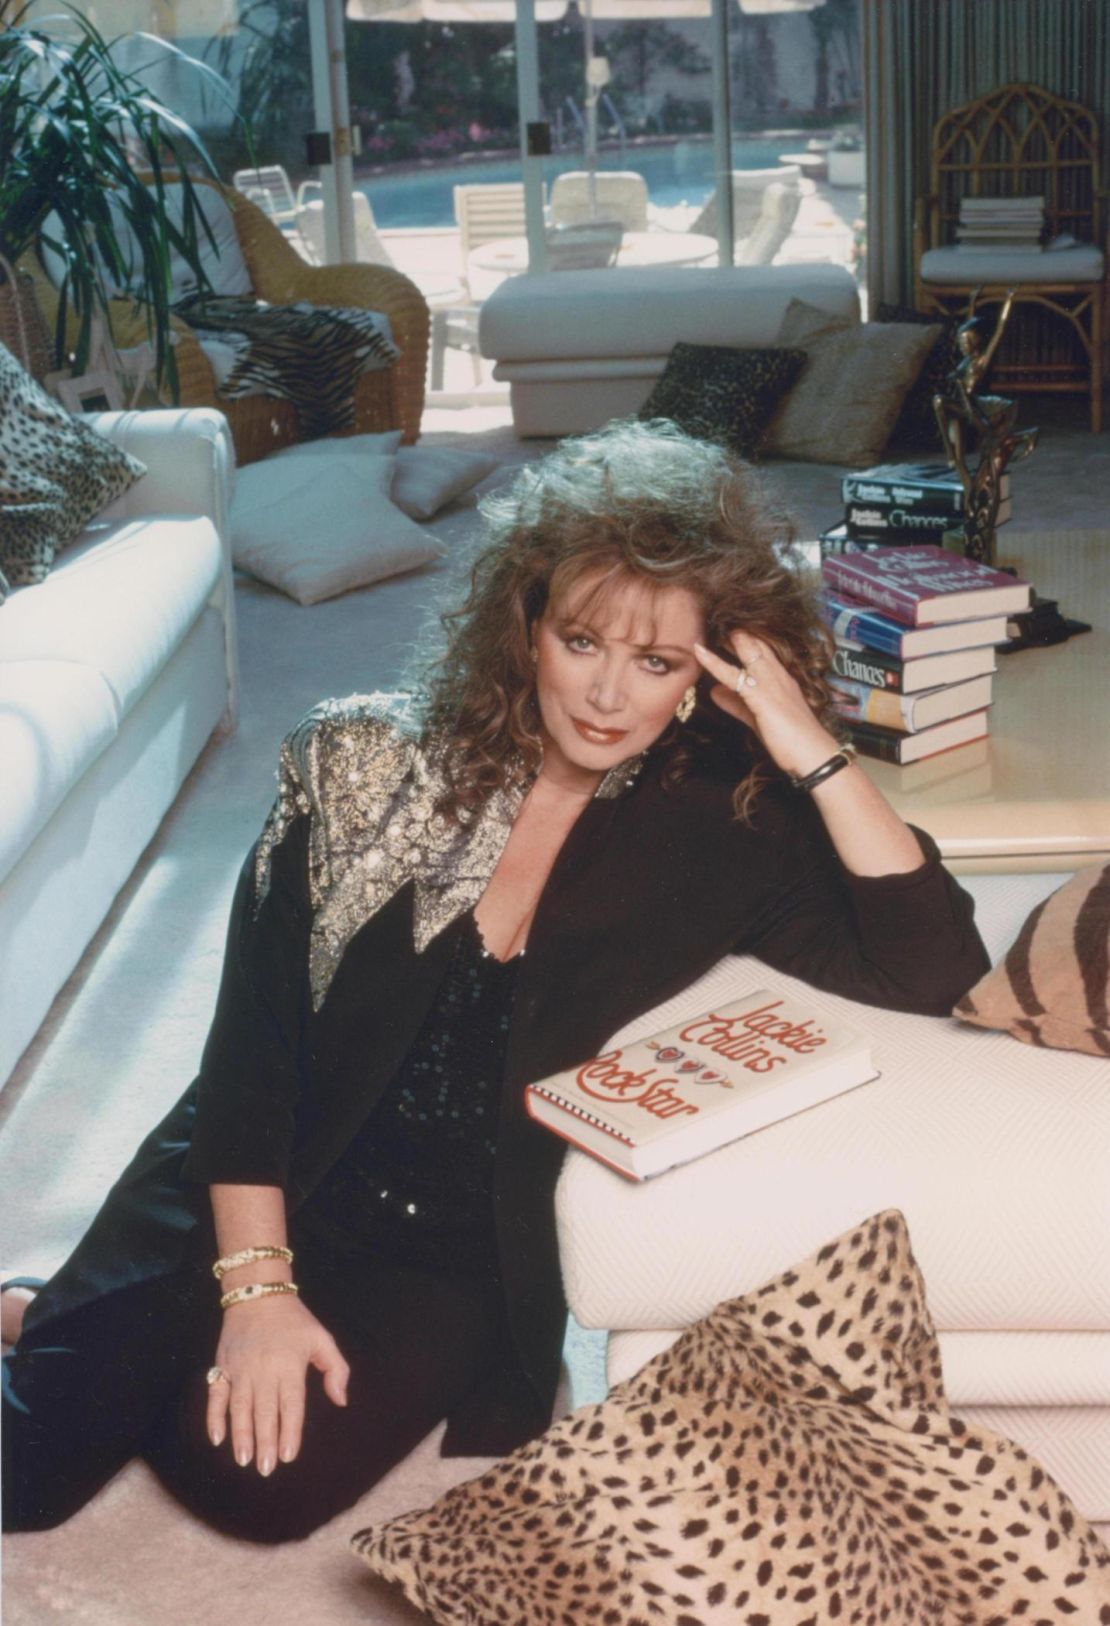 More than 500 million copies of Jackie Collins' books were sold in 40 countries around the world.